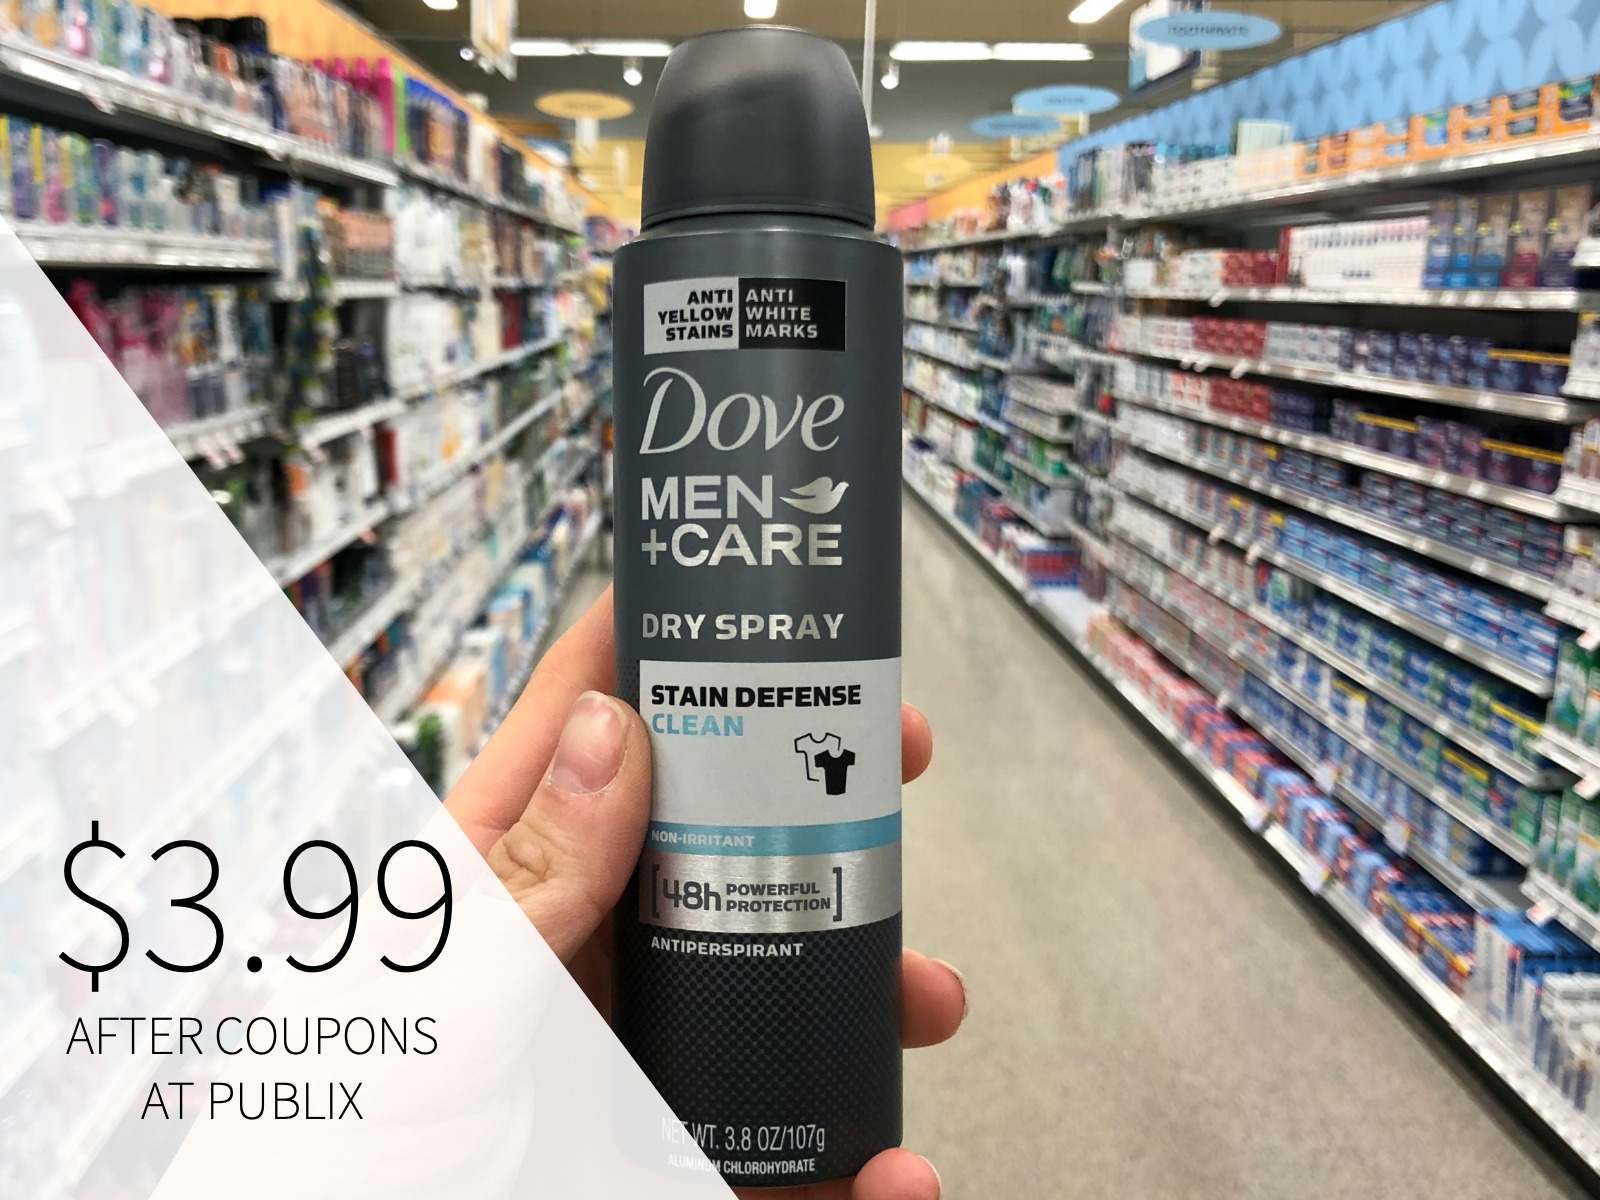 Savings On Dove Men+Care & Degree Products For The Guys At Your Local Publix! on I Heart Publix